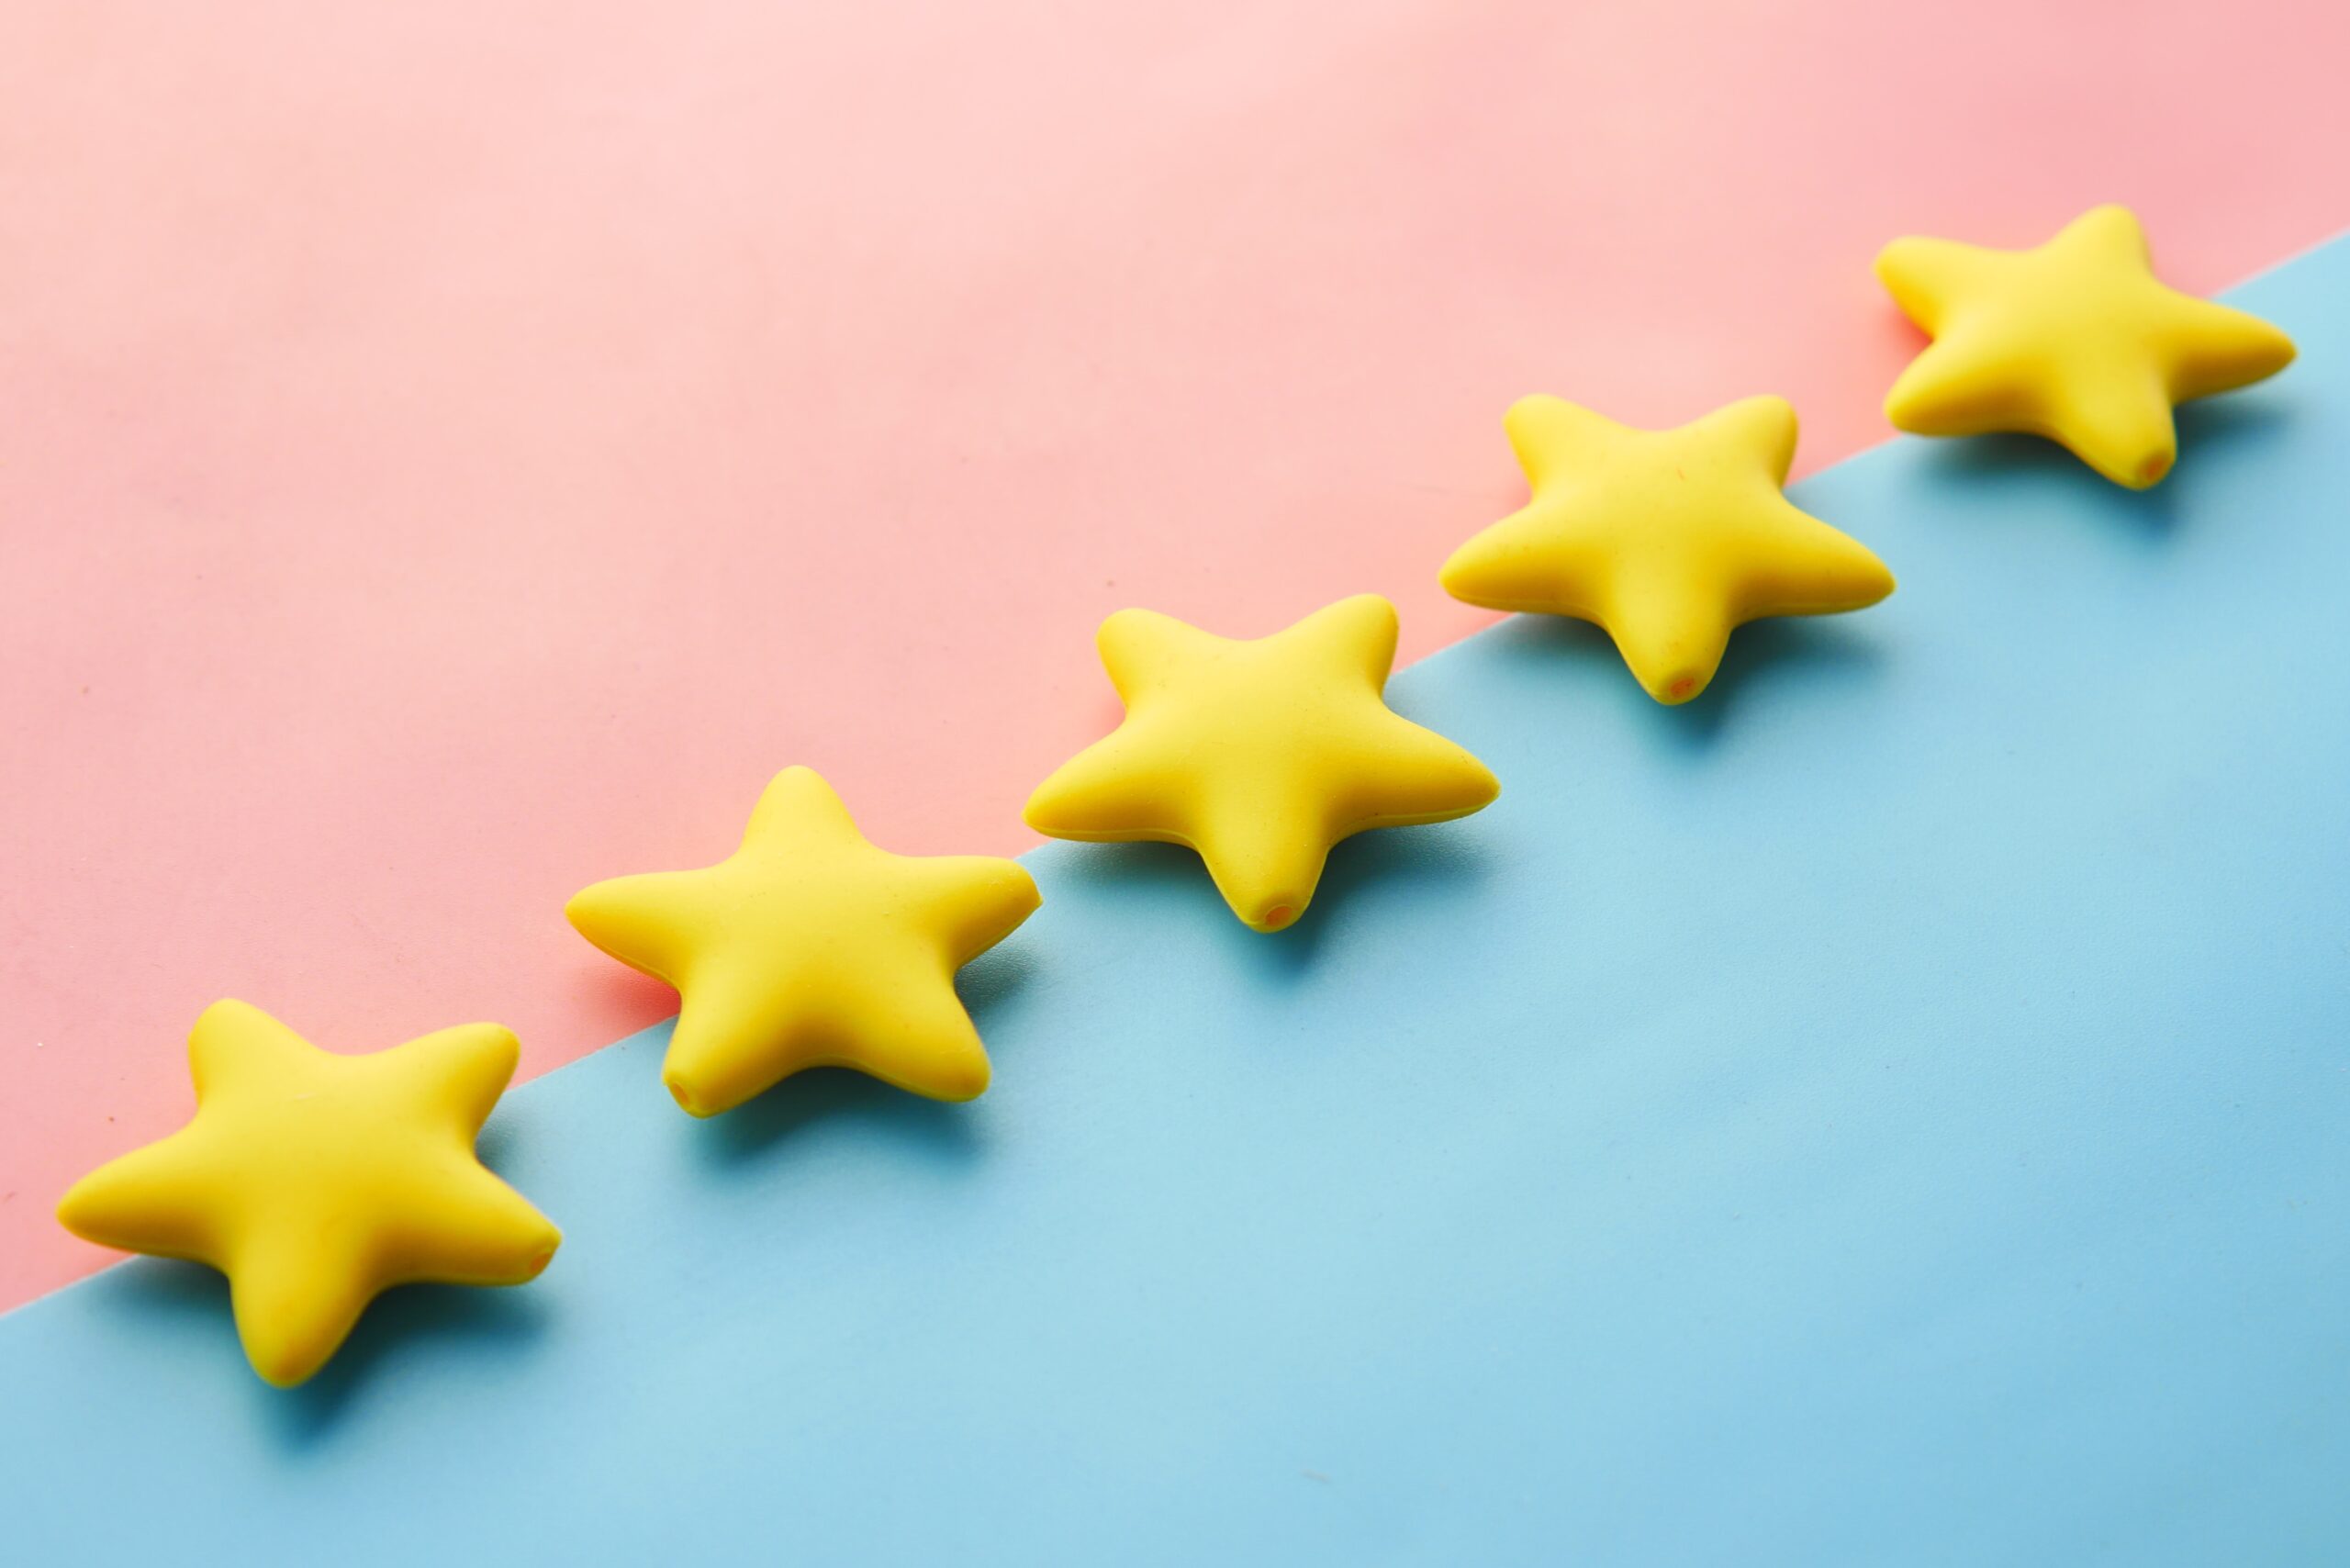 Five yellow stars on a blue and pink surface.